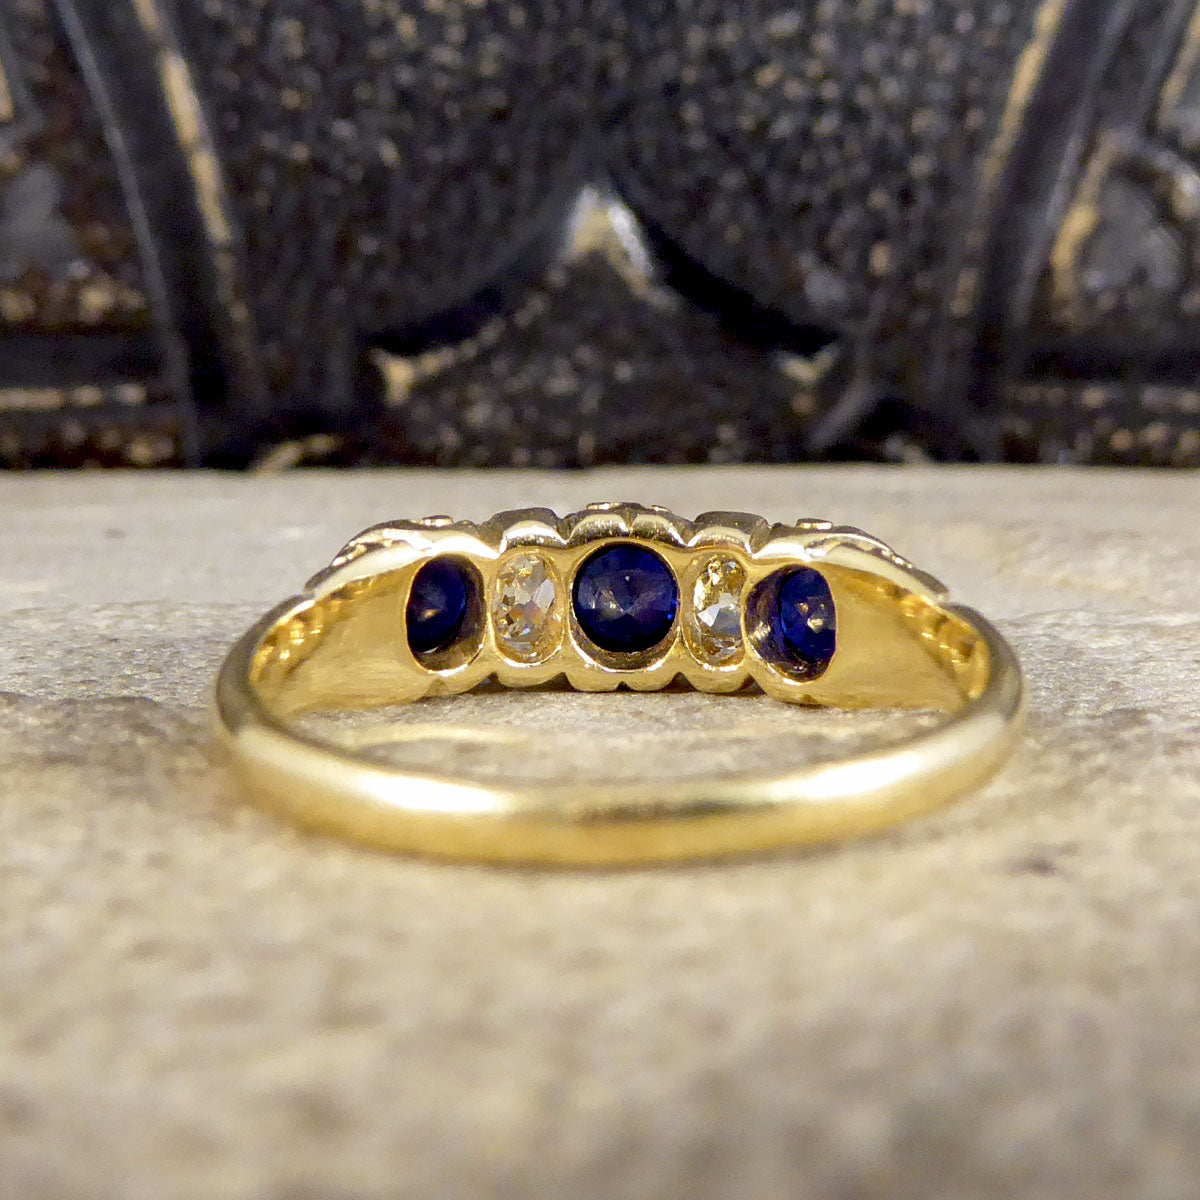 Antique Late Victorian Sapphire and Diamond Five Stone Ring in 18ct Yellow Gold